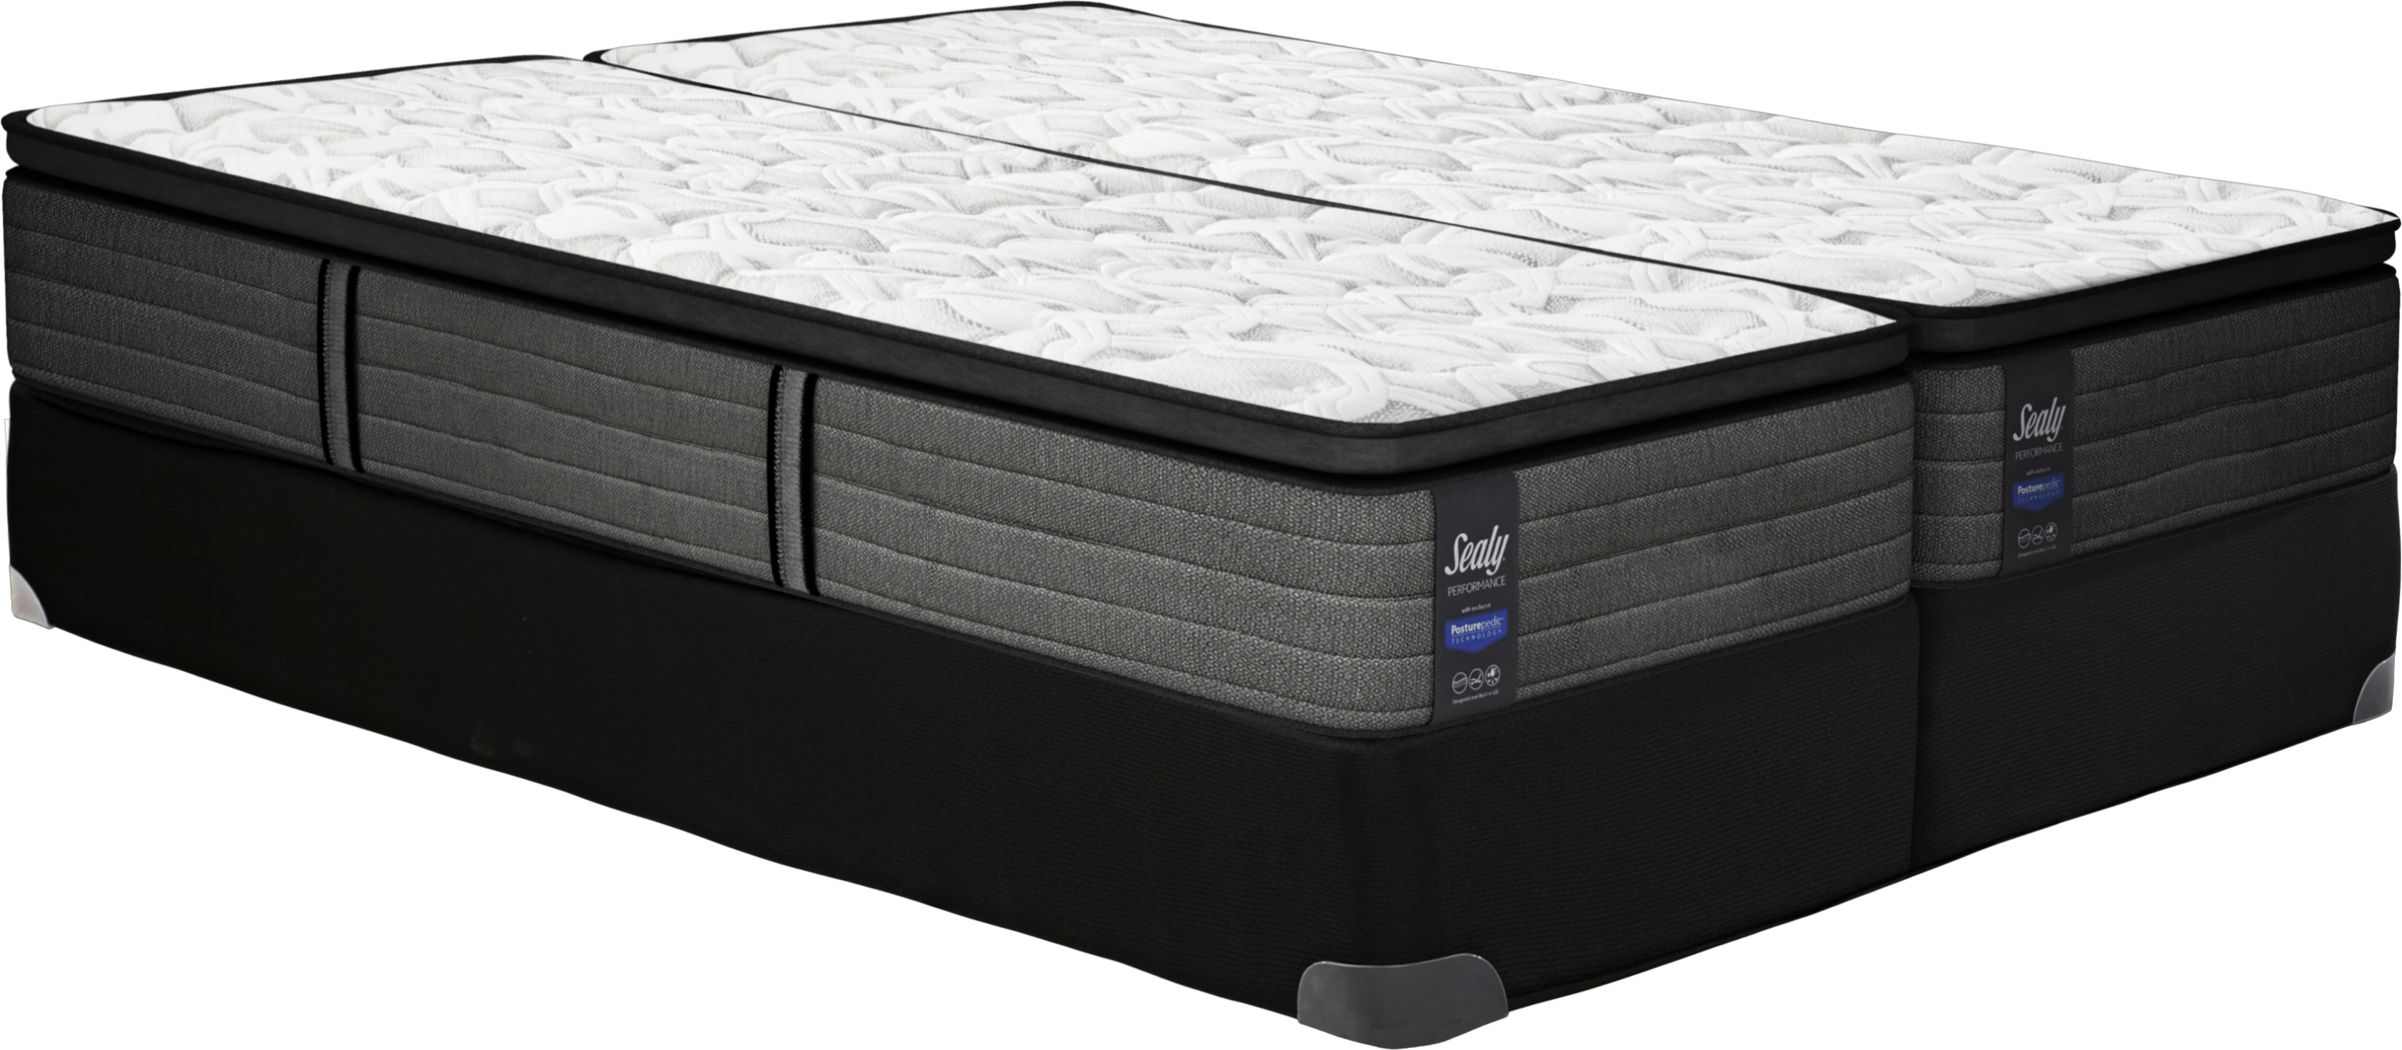 sealy gray cove mattress review